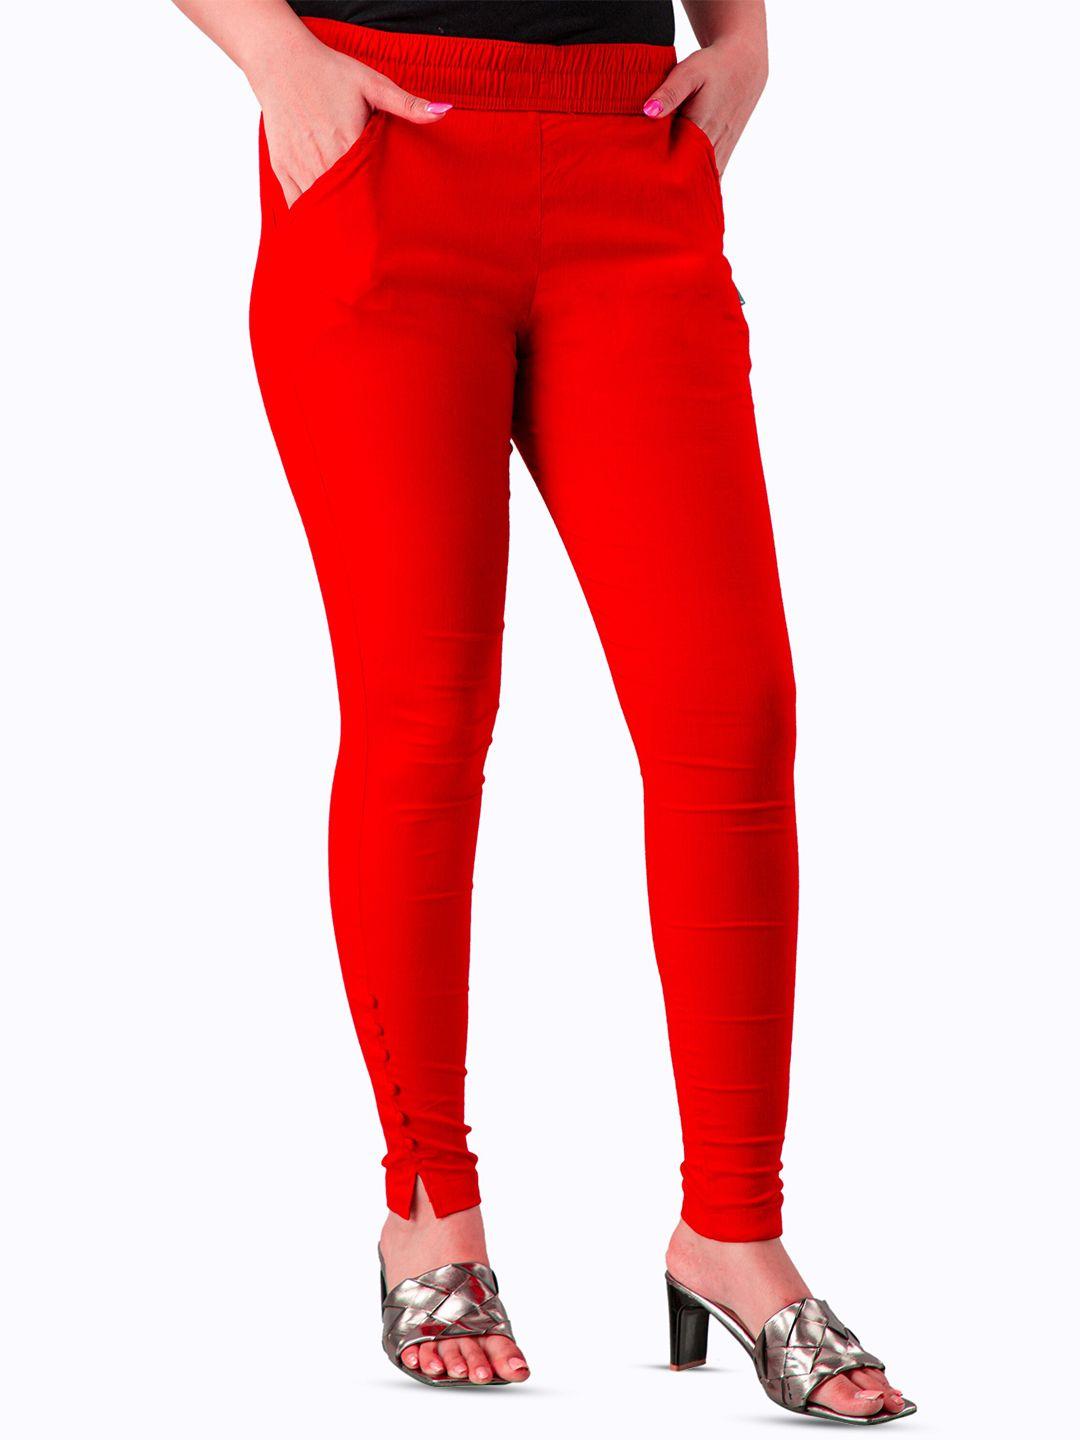 baesd women relaxed fit stretchable jeggings